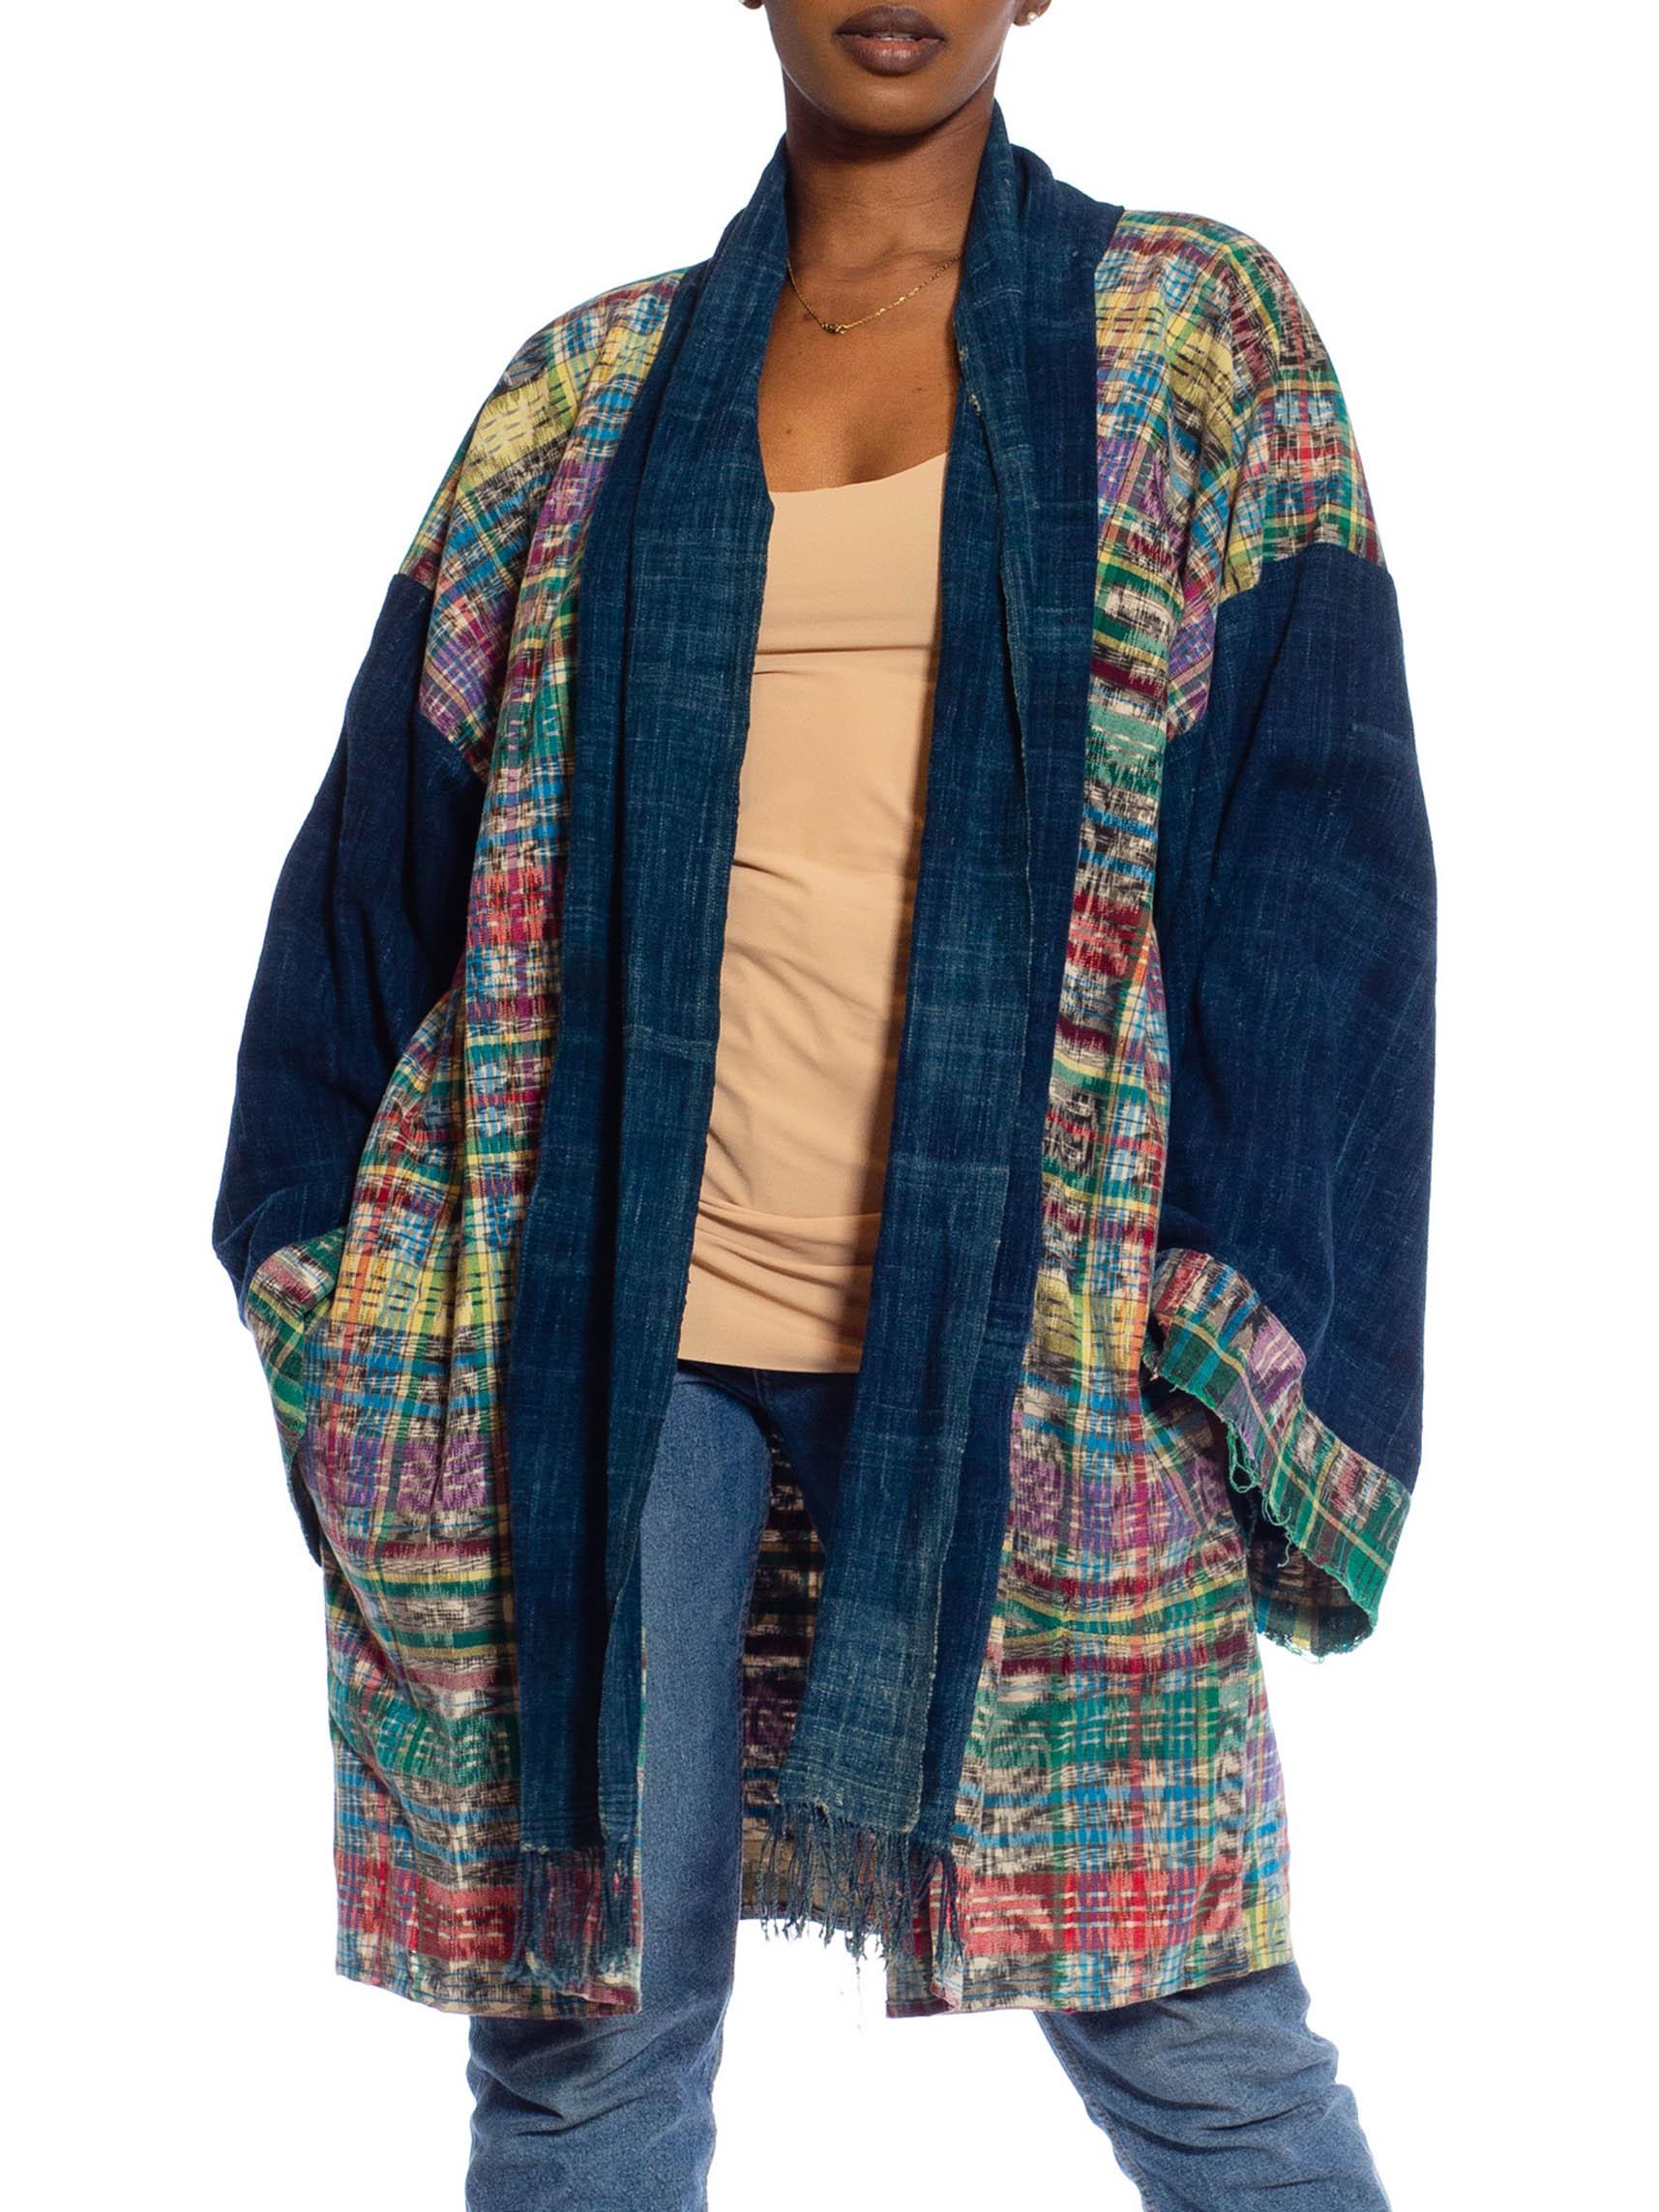 MORPHEW COLLECTION Navy Blue Multi African Cotton & Hand-Woven Guatemalan Ikat  For Sale 2